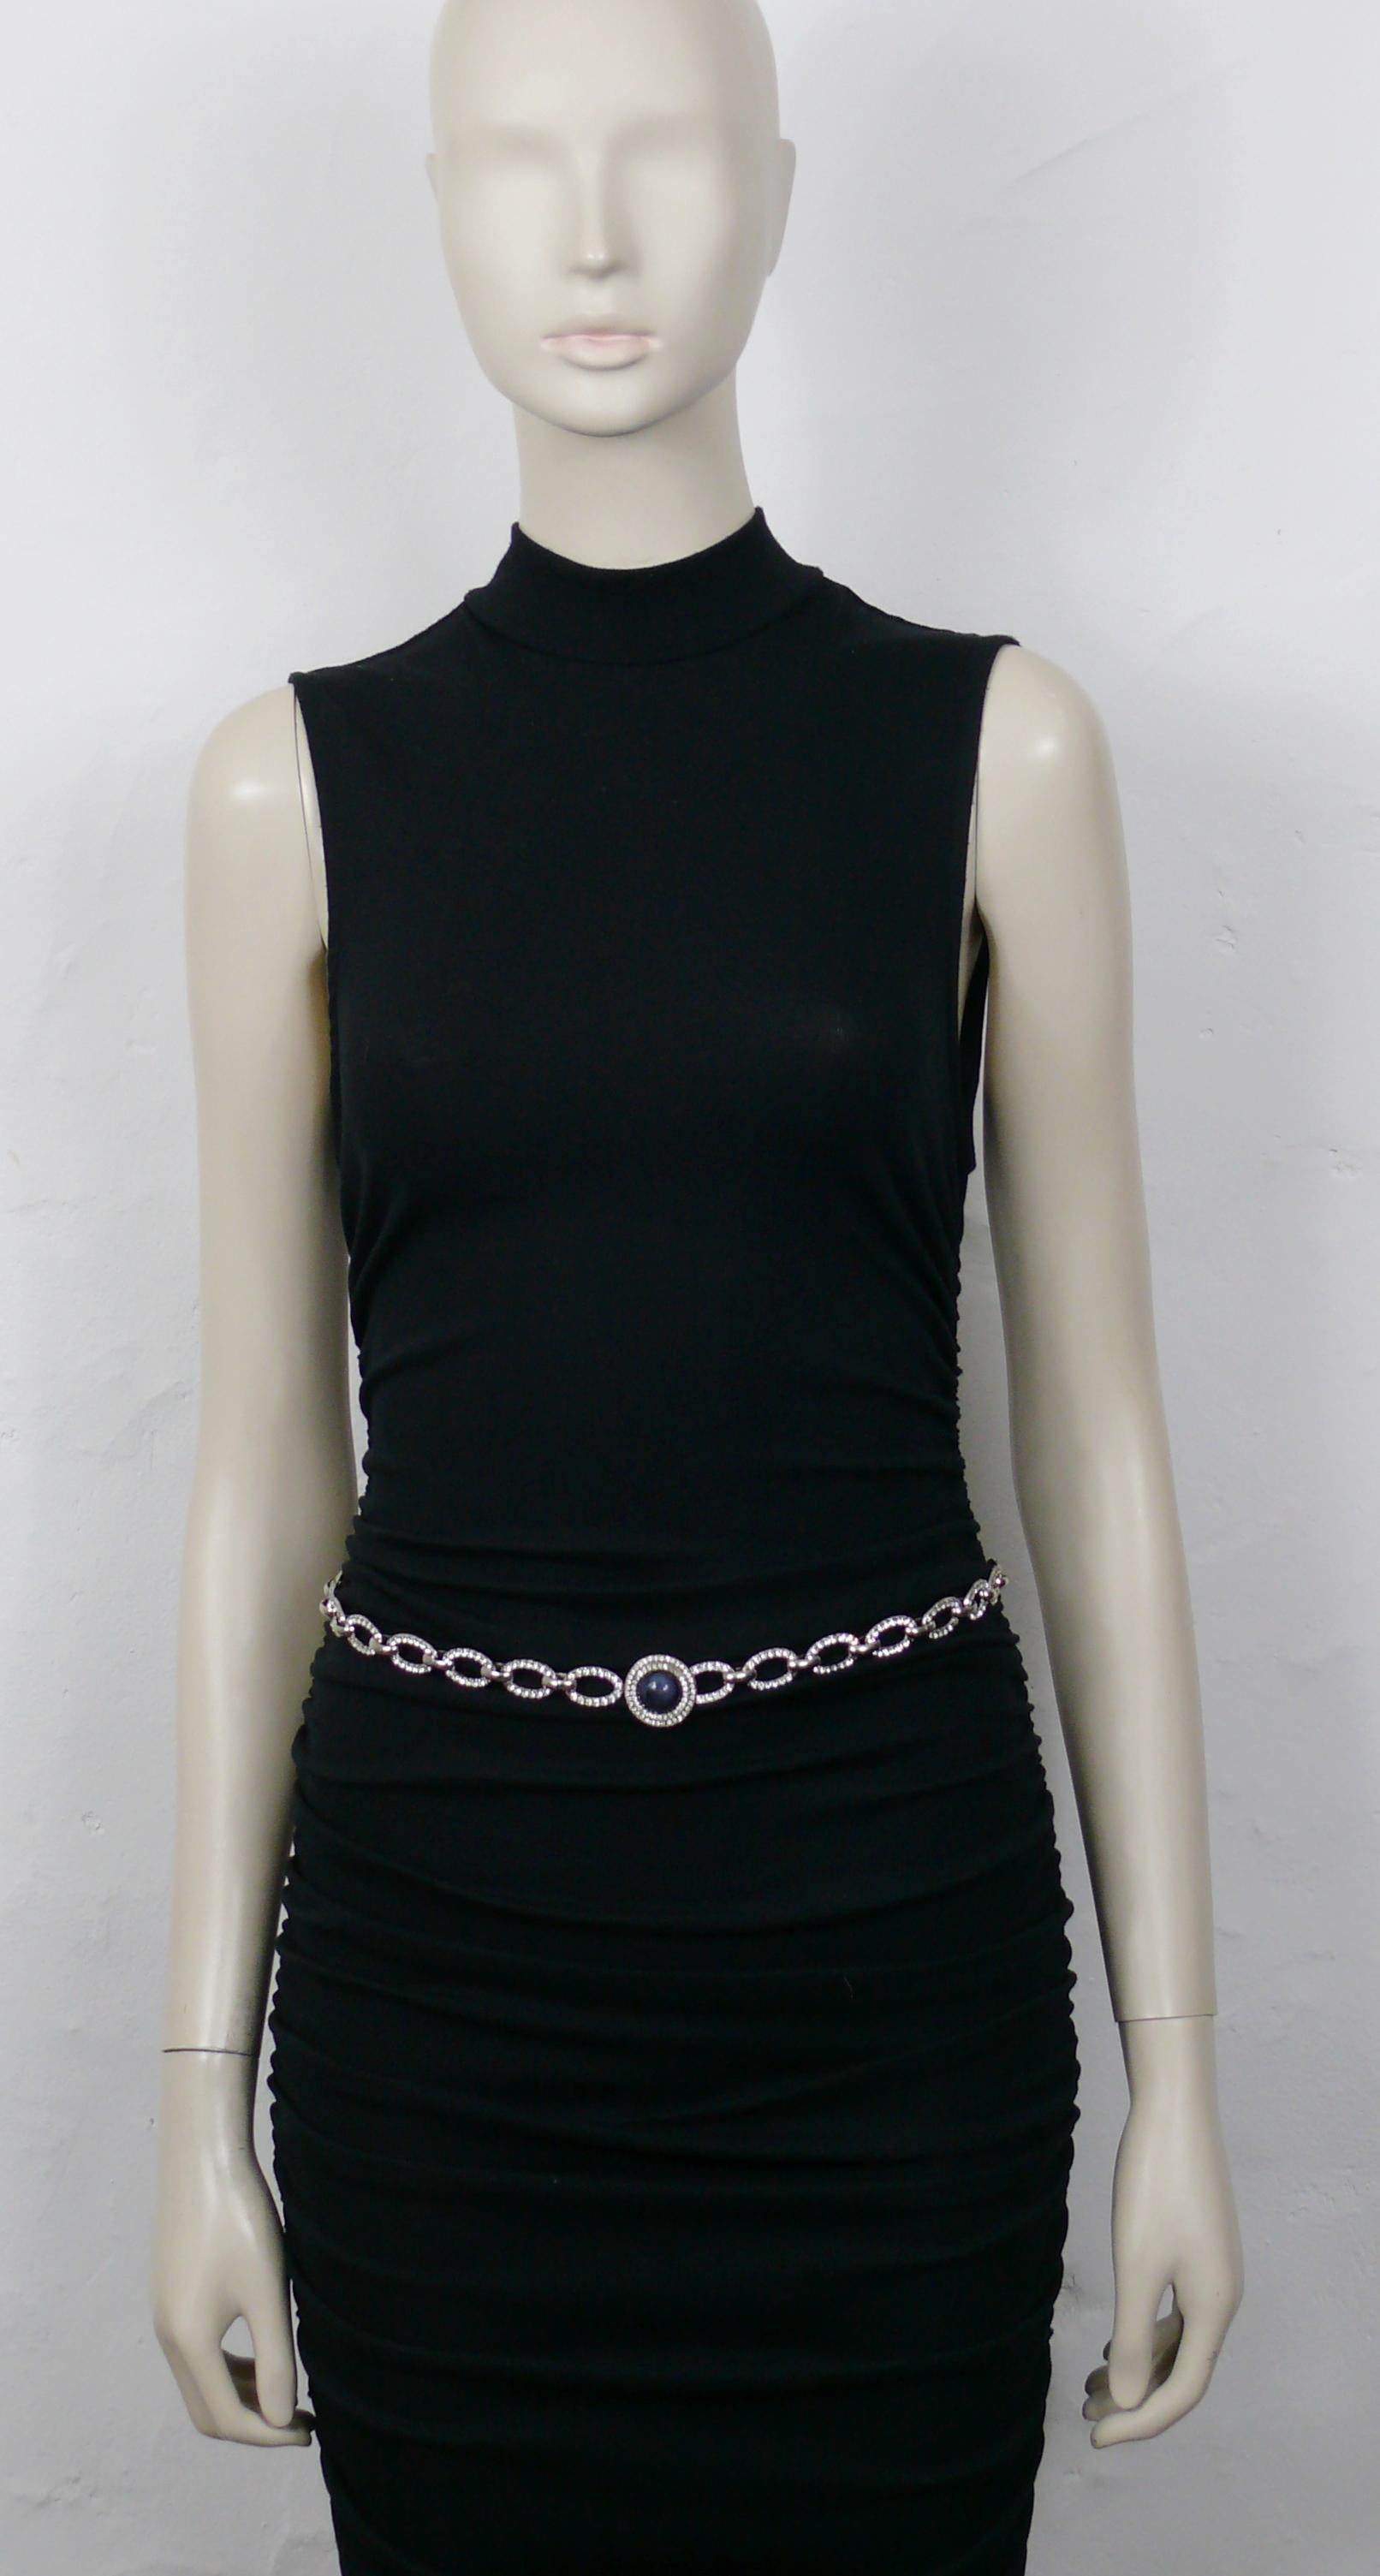 YVES SAINT LAURENT vintage 1970 silver tone chain belt featuring oval links embellished with clear crystals and a marbled blue glass cabochon.

Similar model in the collections of the METROPOLITAN MUSEUM OF ART in NEW YORK.

Embossed YSL on the